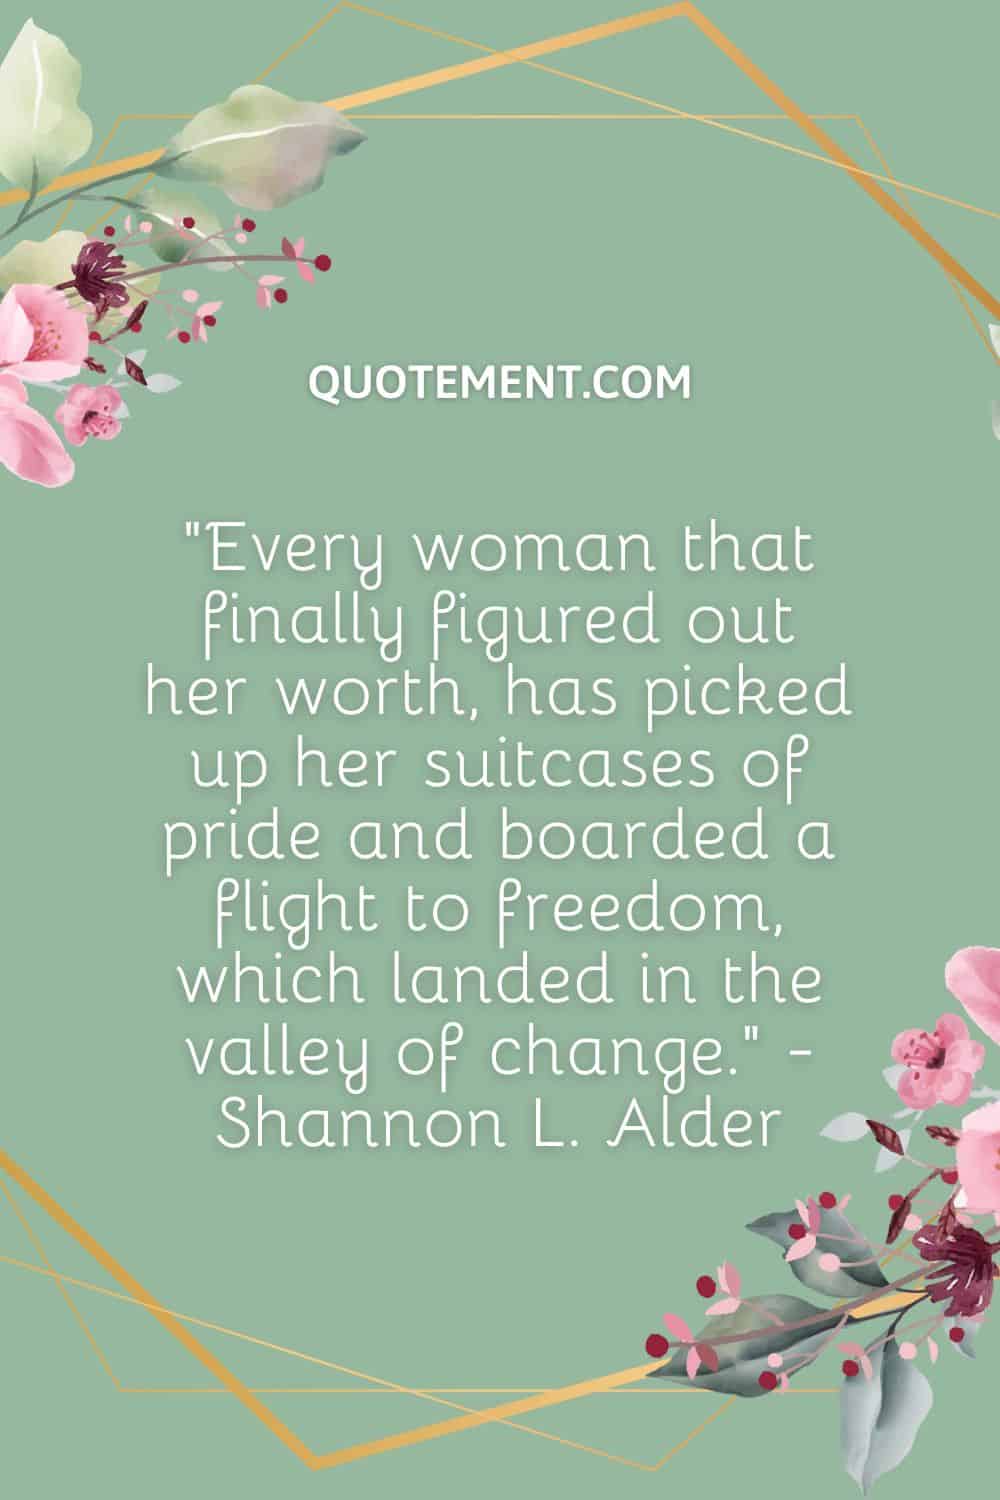 Every woman that finally figured out her worth, has picked up her suitcases of pride and boarded a flight to freedom